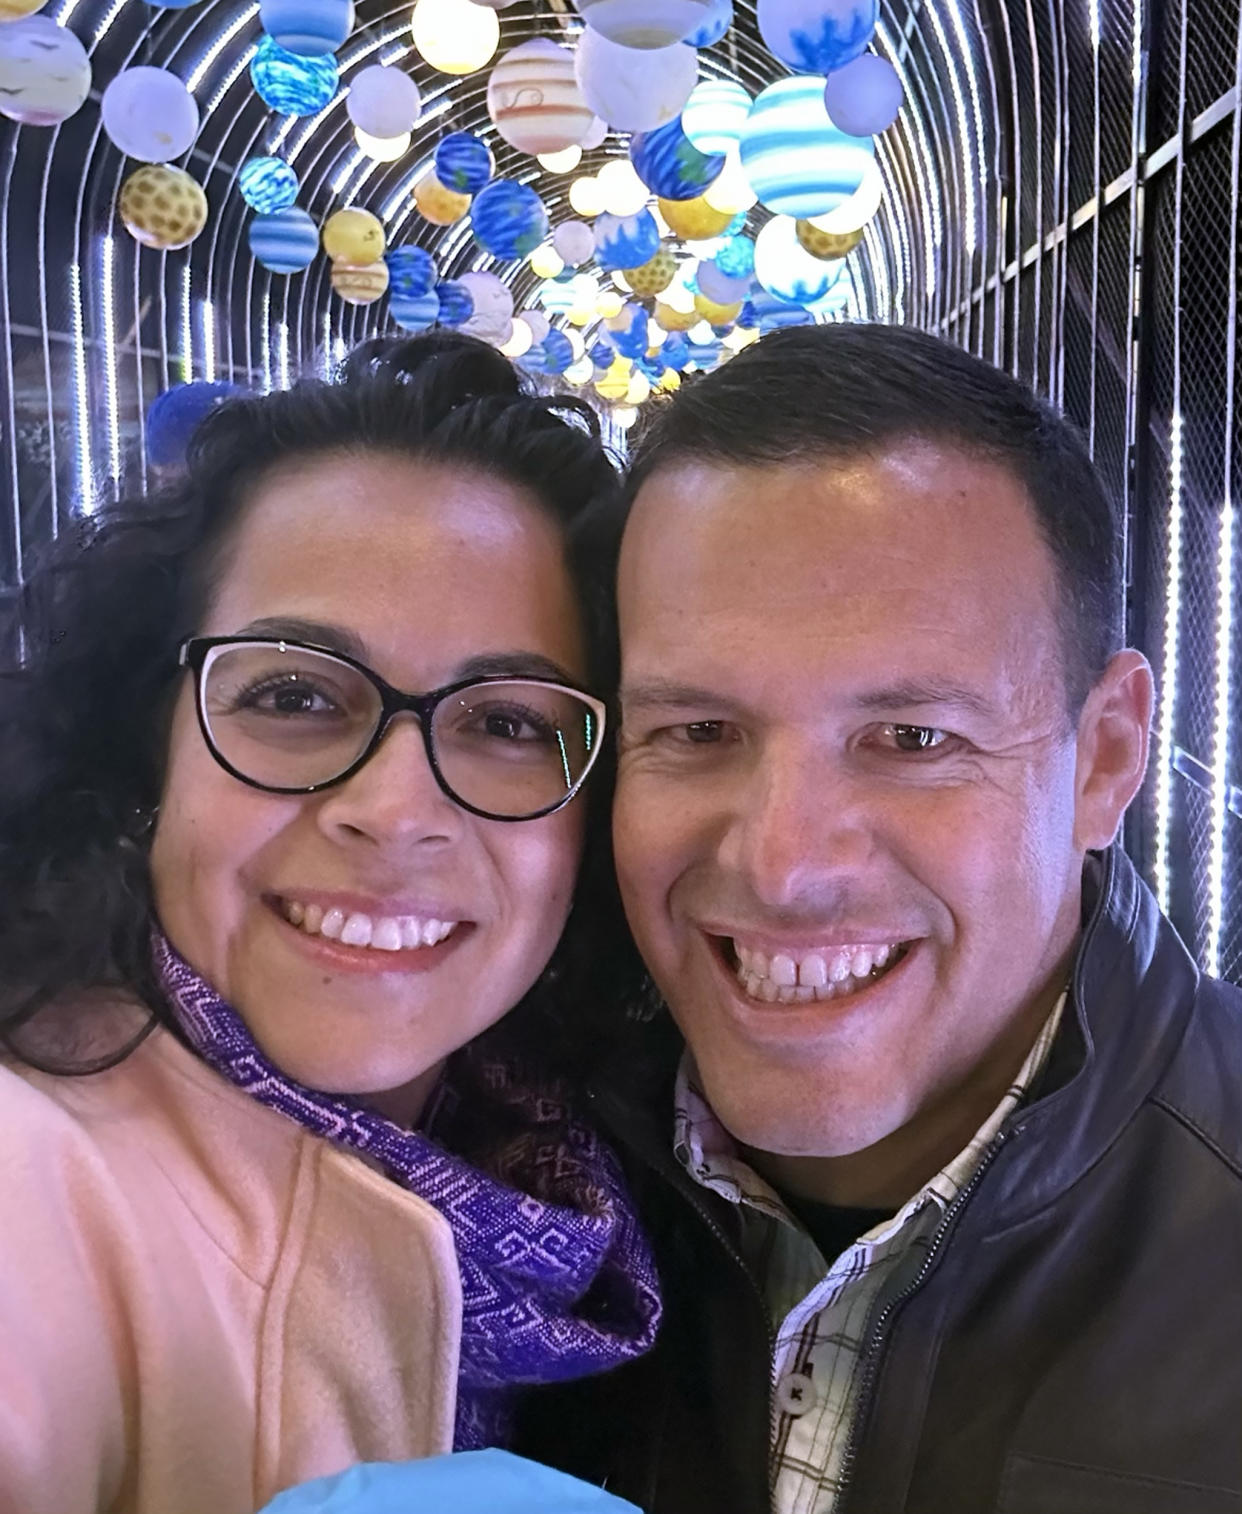 When Sara Montiel was diagnosed with breast cancer, she wanted to make sure the treatment worked. She soon learned there were unexpected side effects that impacted her sexual health. (Courtesy Sara Montiel)